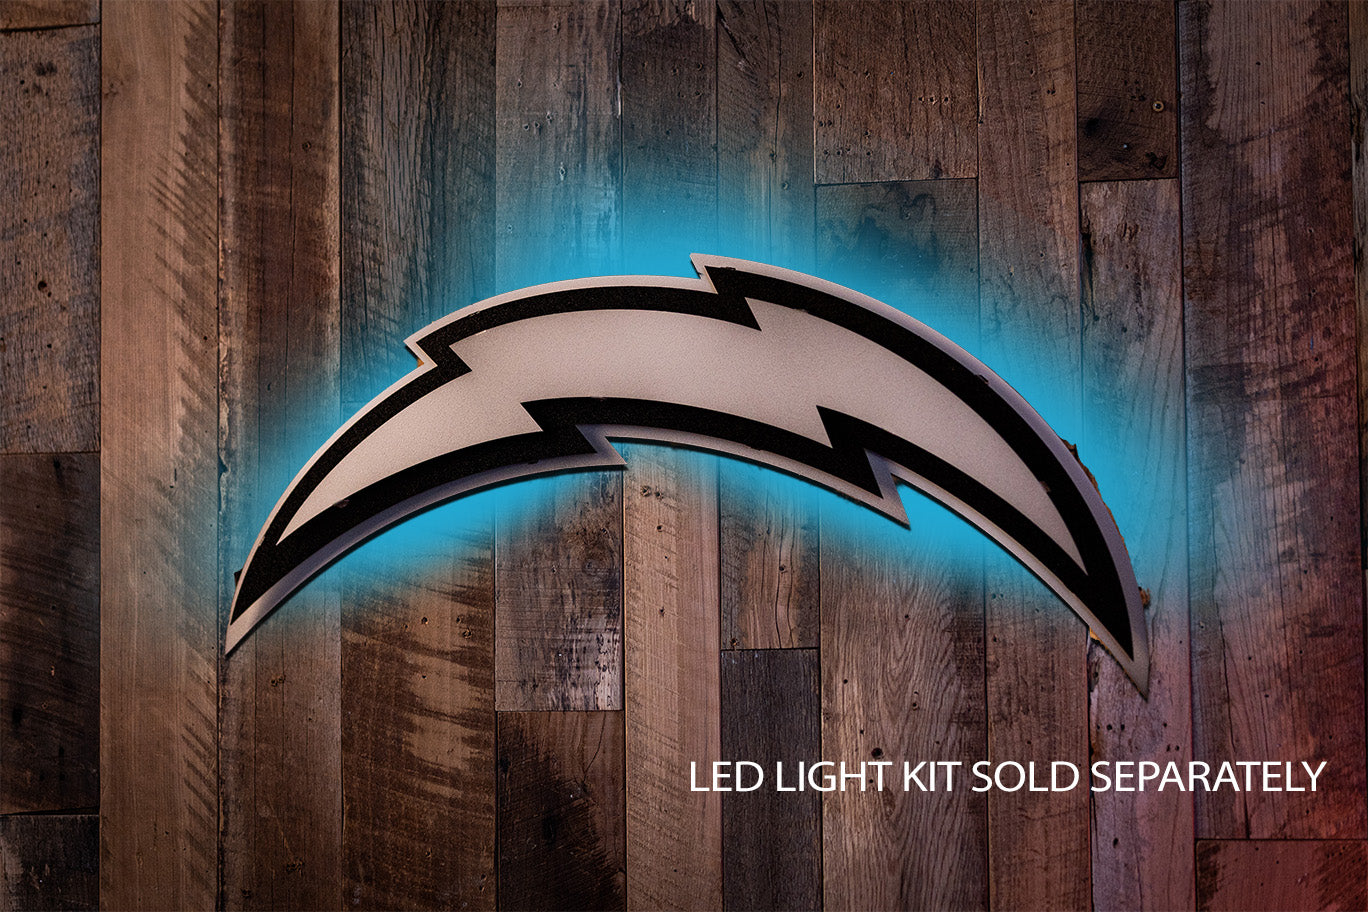 MONOCHROME - Los Angeles Chargers Lightning Bolt 3D Vintage Metal Wall Art